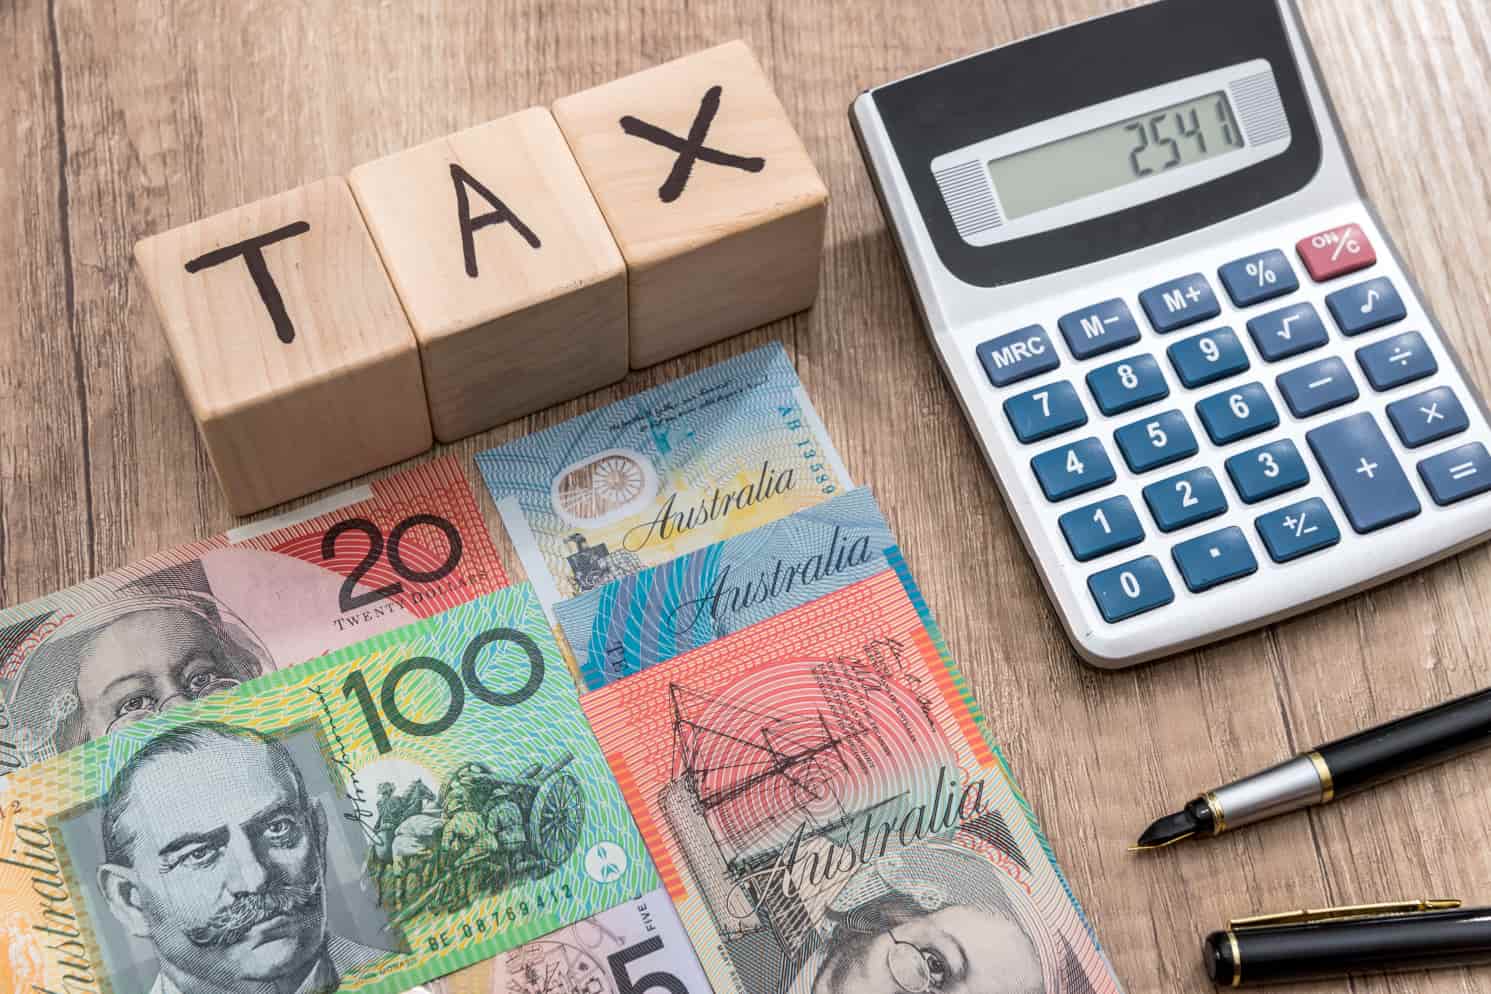 Australian dollars next to a pocket calculator and three wooden cubes with the word "tax" written on them